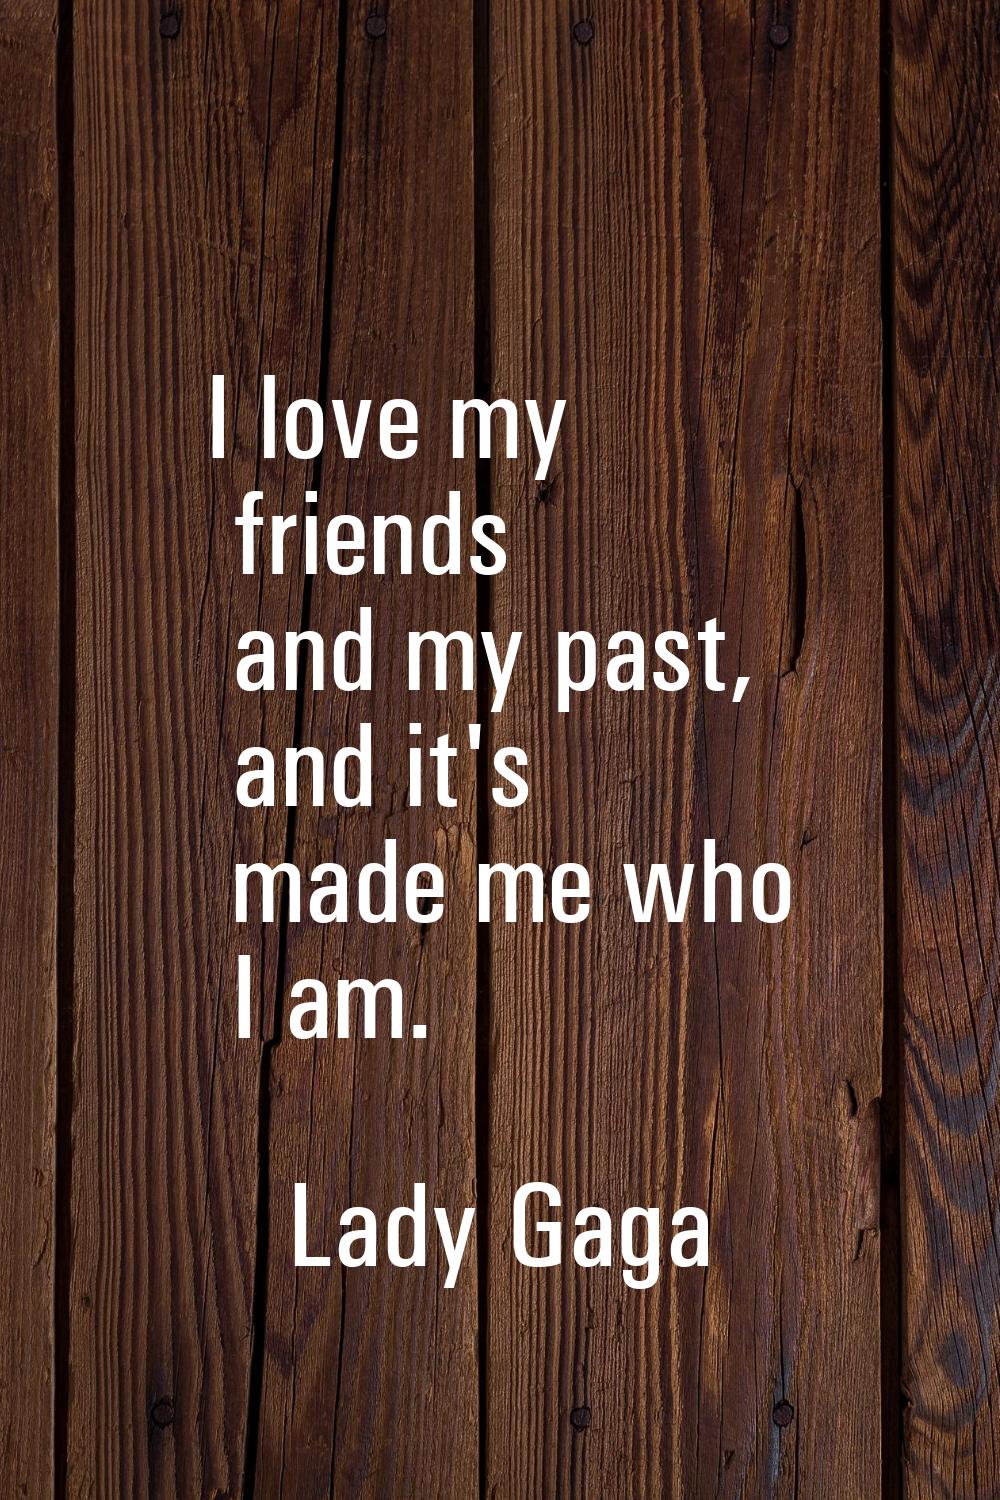 I love my friends and my past, and it's made me who I am.